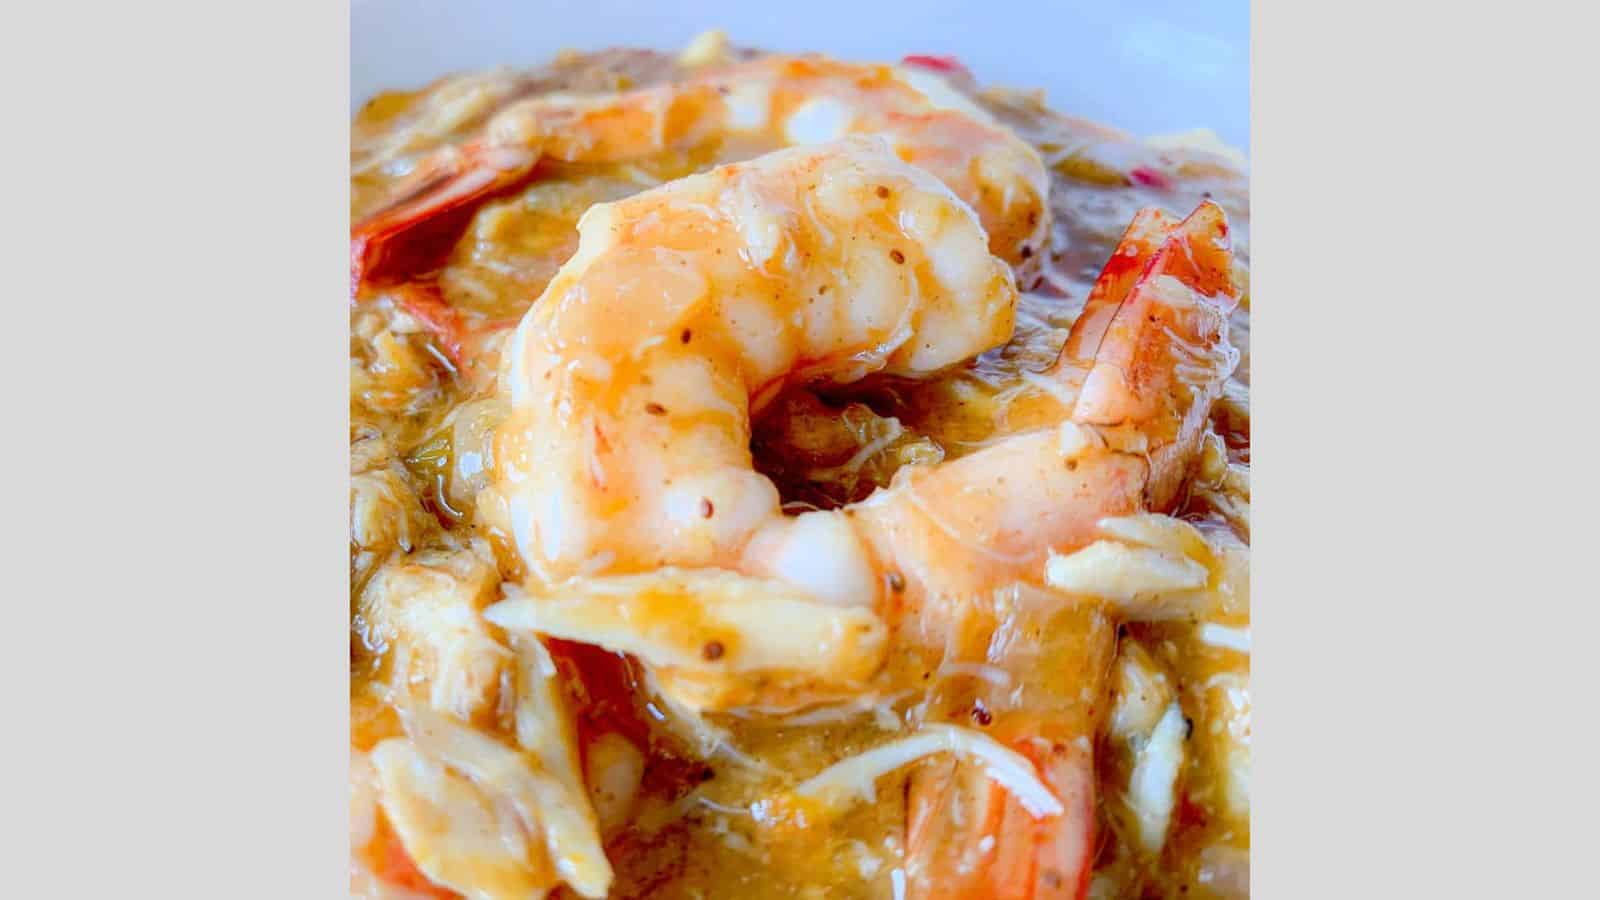 A large shrimp in a sea of crab gravy atop cheese grits.